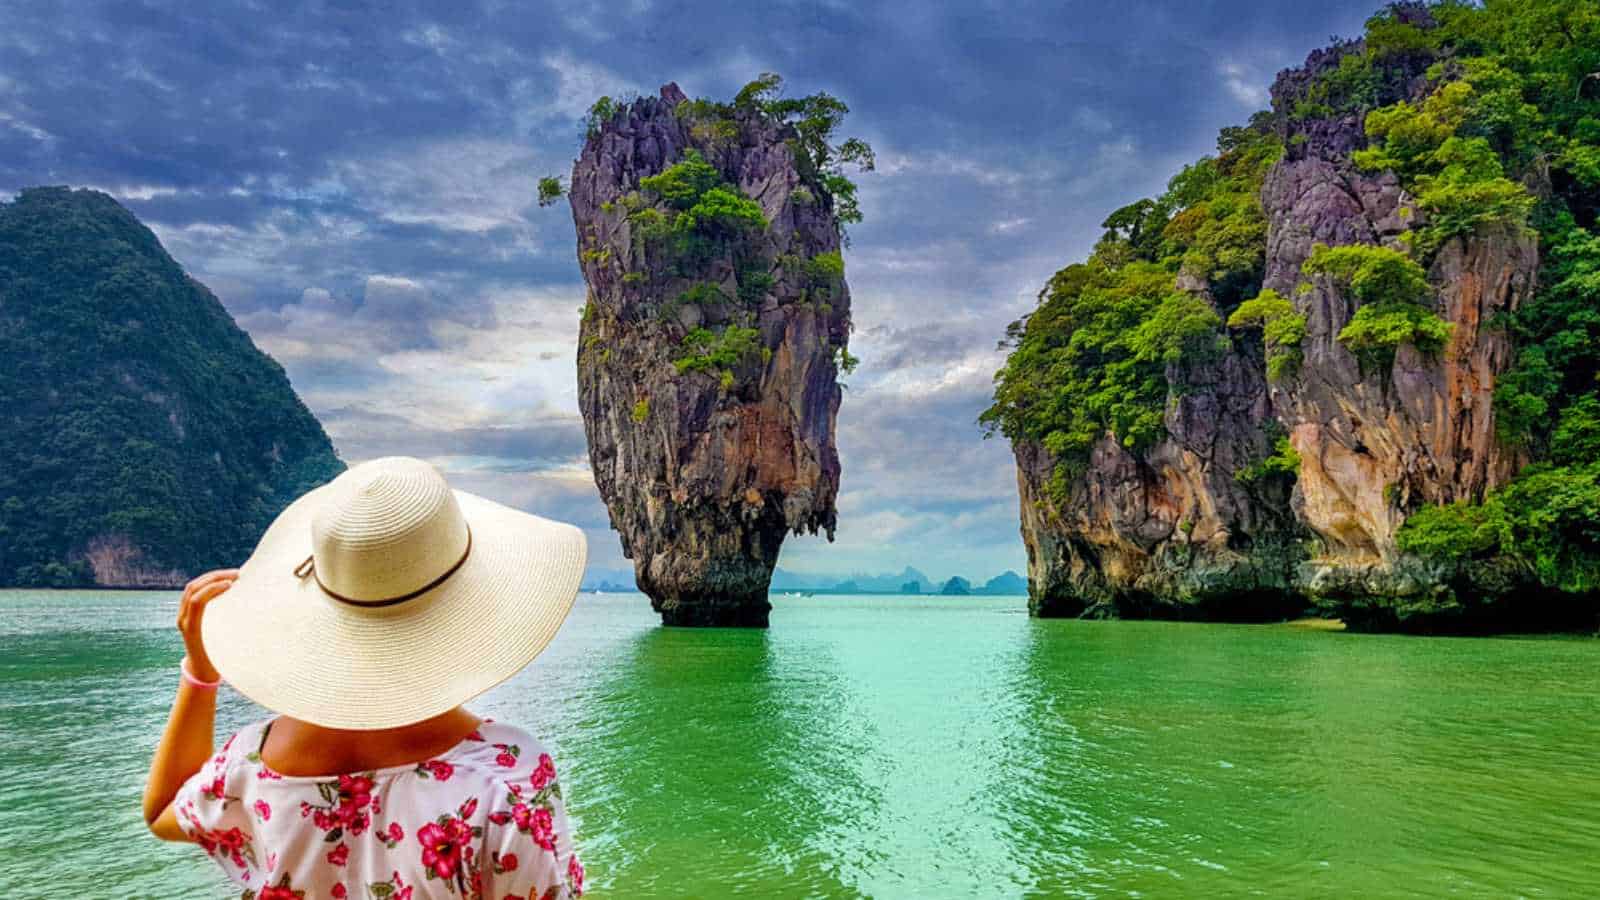 Woman tourist with hat and floral dress looking at James Bond island in Thailand